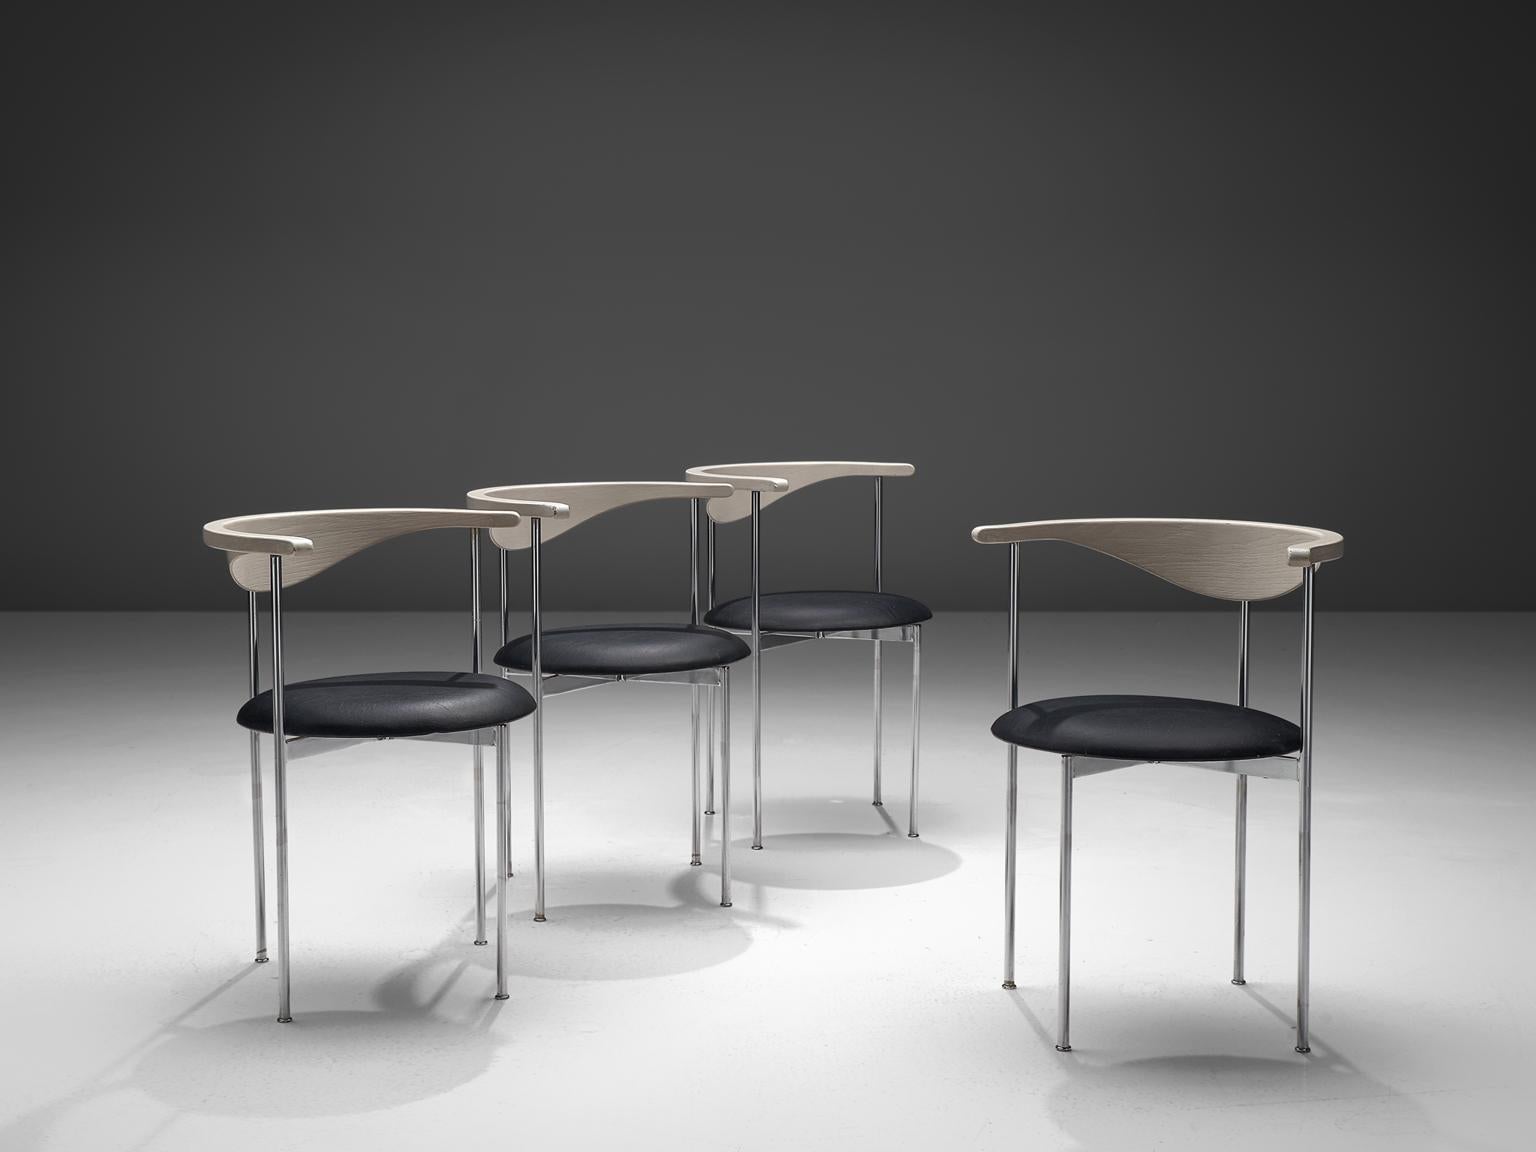 Frederik Sieck, four chairs, black skai, metal, lacquered wood, Denmark, design 1962, execution 1967.

These industrial clear set of the model 3200 chairs were designed by the Swedish Frederik Sieck for Fritz Hansen. The round chair has a Classic